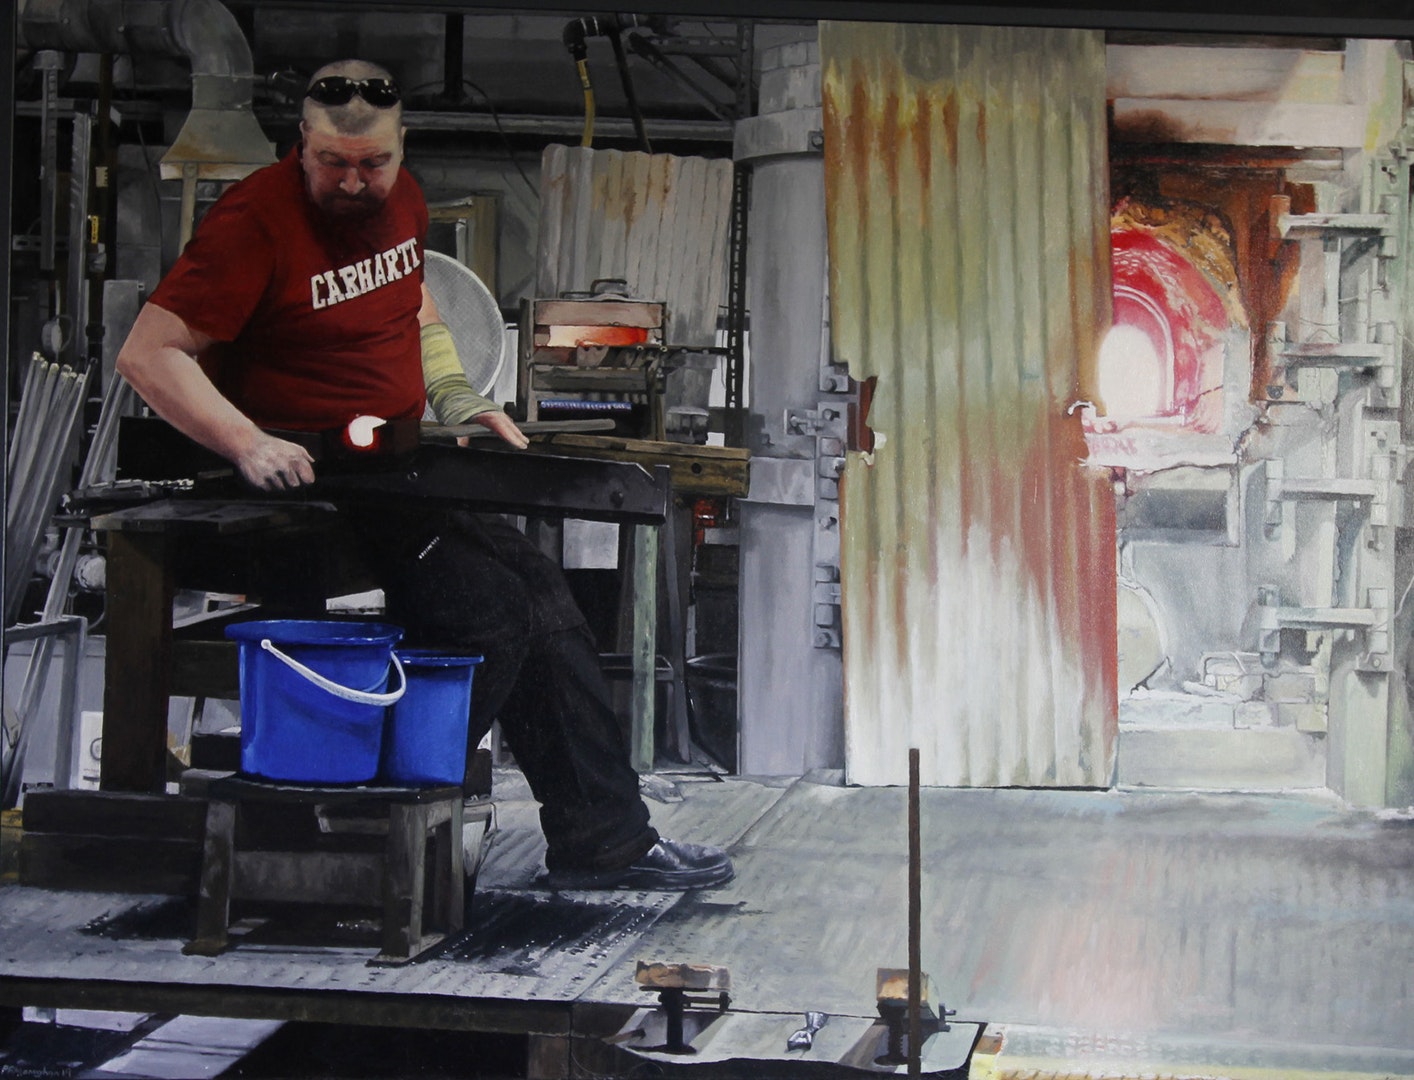 'Glass worker number 3', Peter Monaghan, Oil on wooden panel, 91 x 69 cm